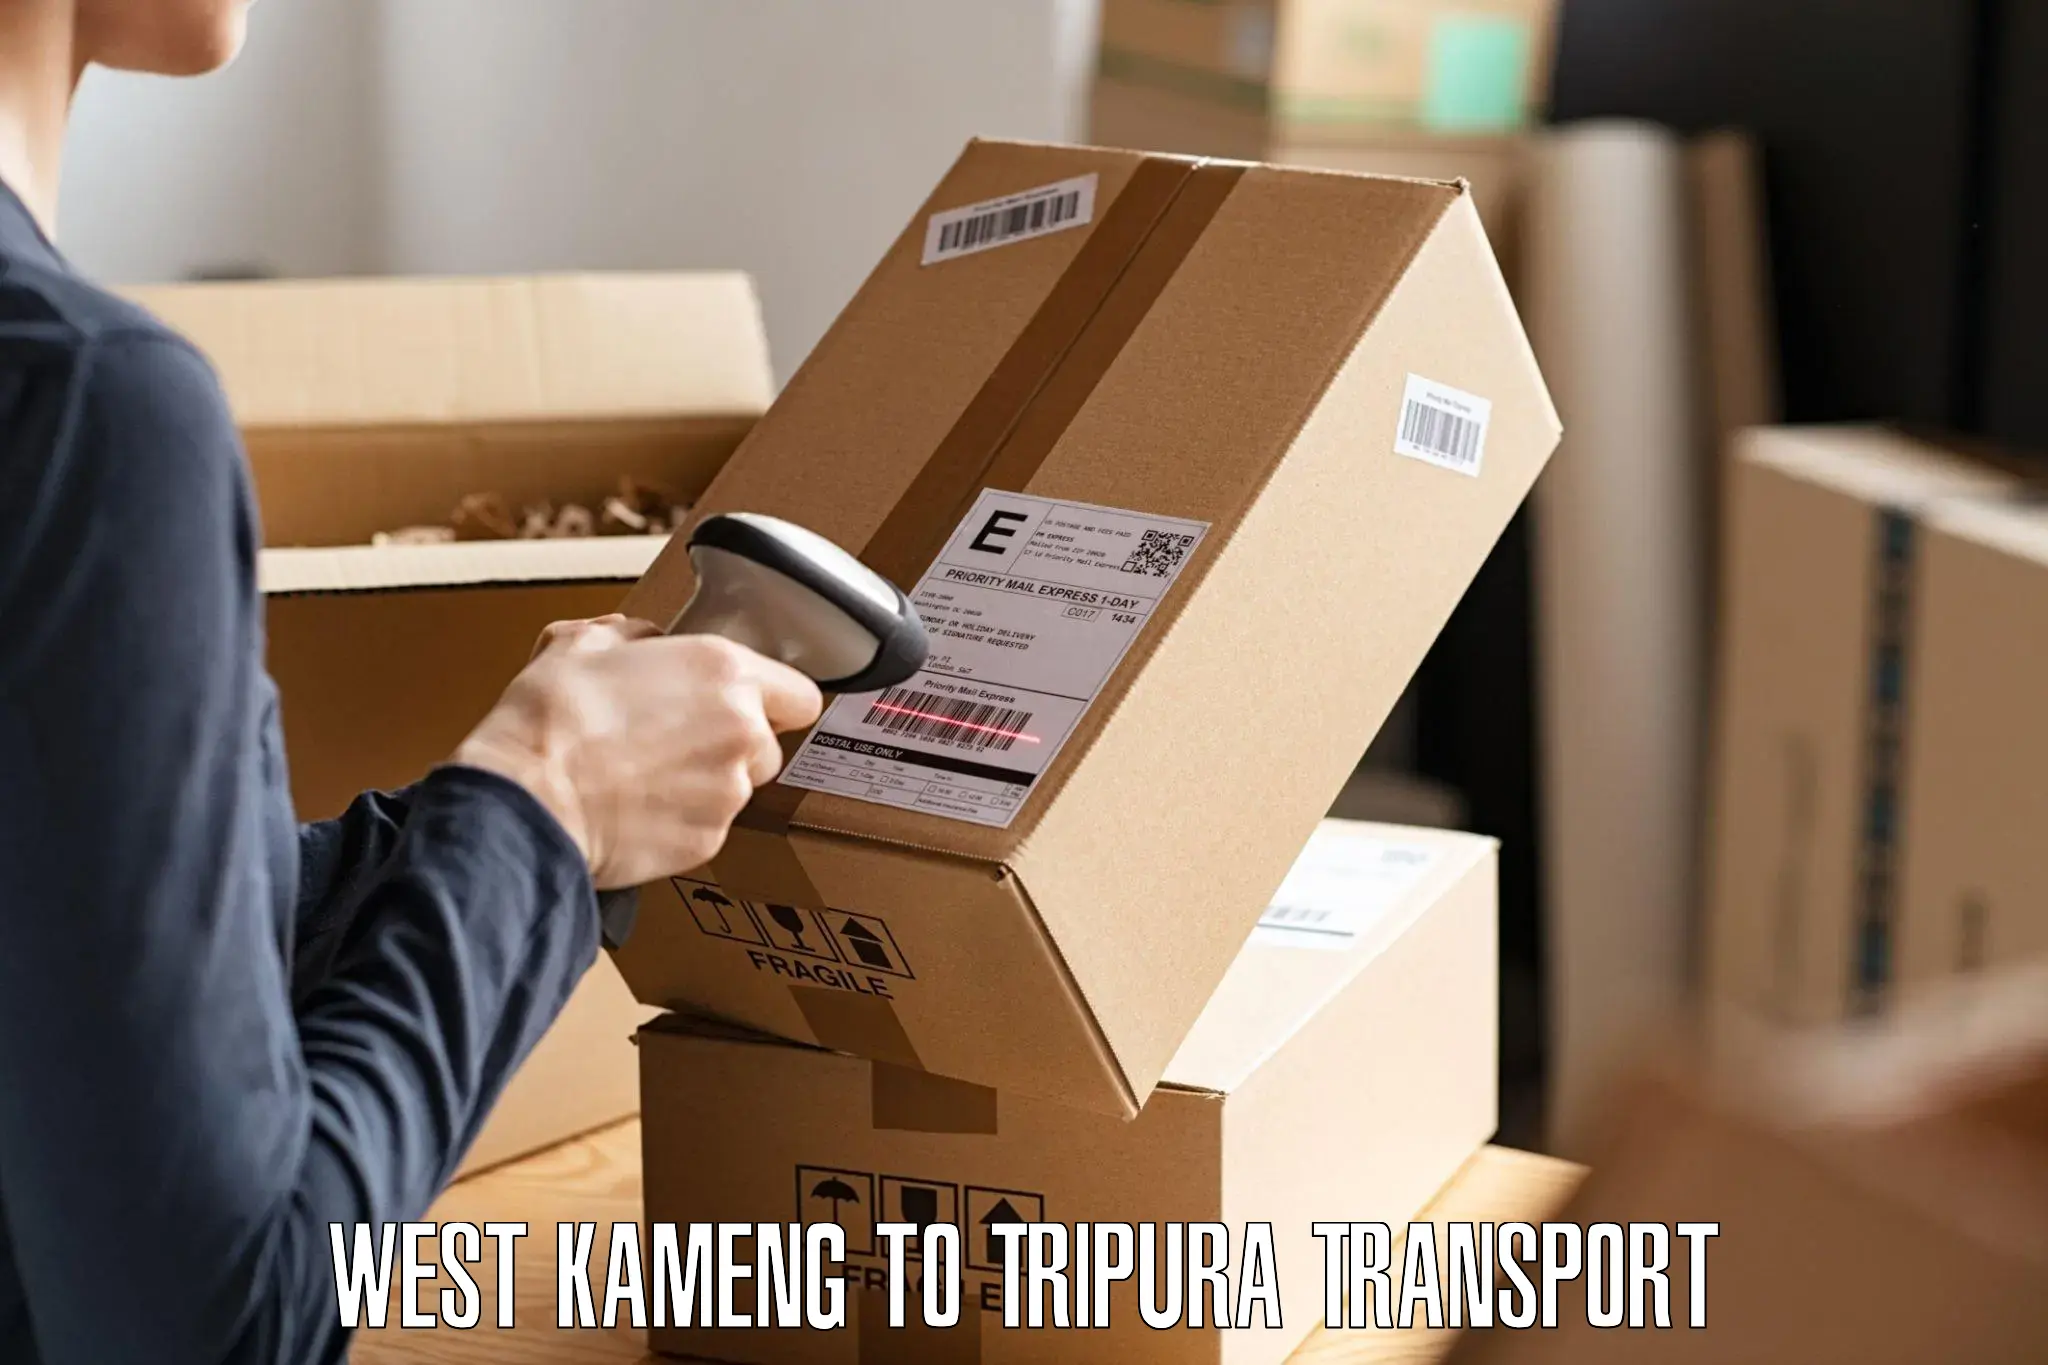 Cycle transportation service West Kameng to Udaipur Tripura